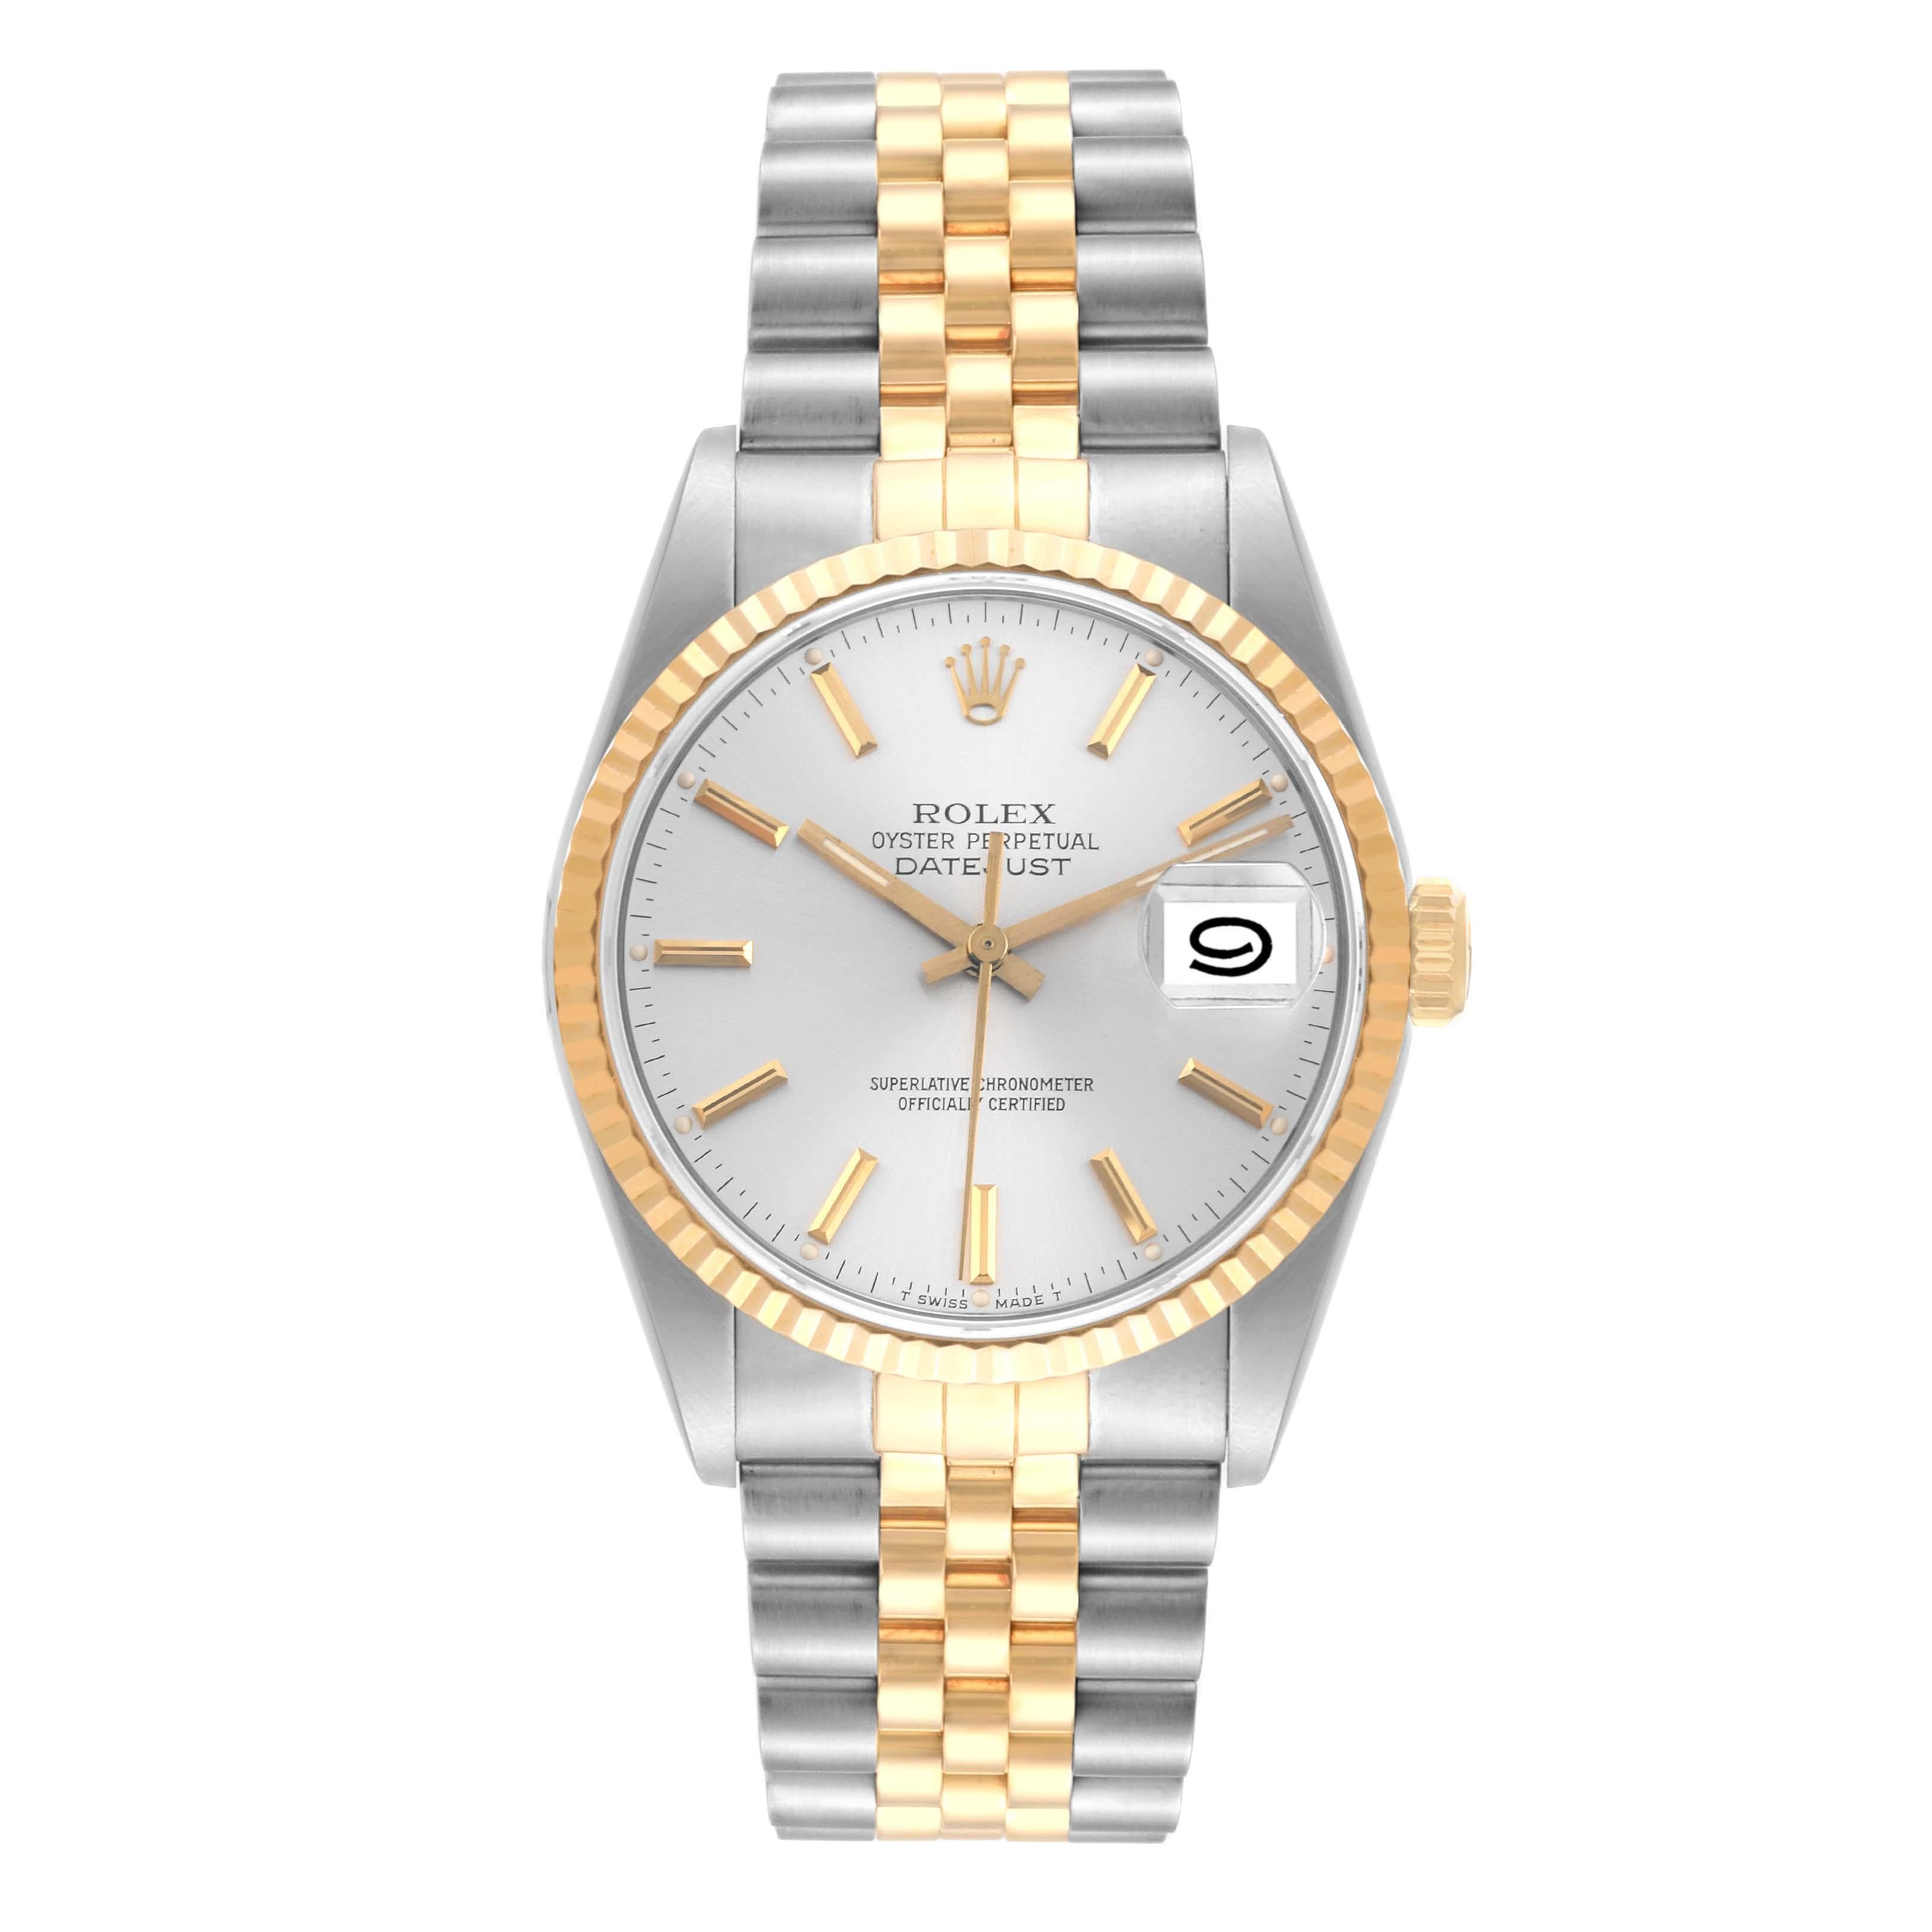 Rolex Datejust 36 Steel Yellow Gold Silver Dial Mens Watch 16233 Box Papers 1